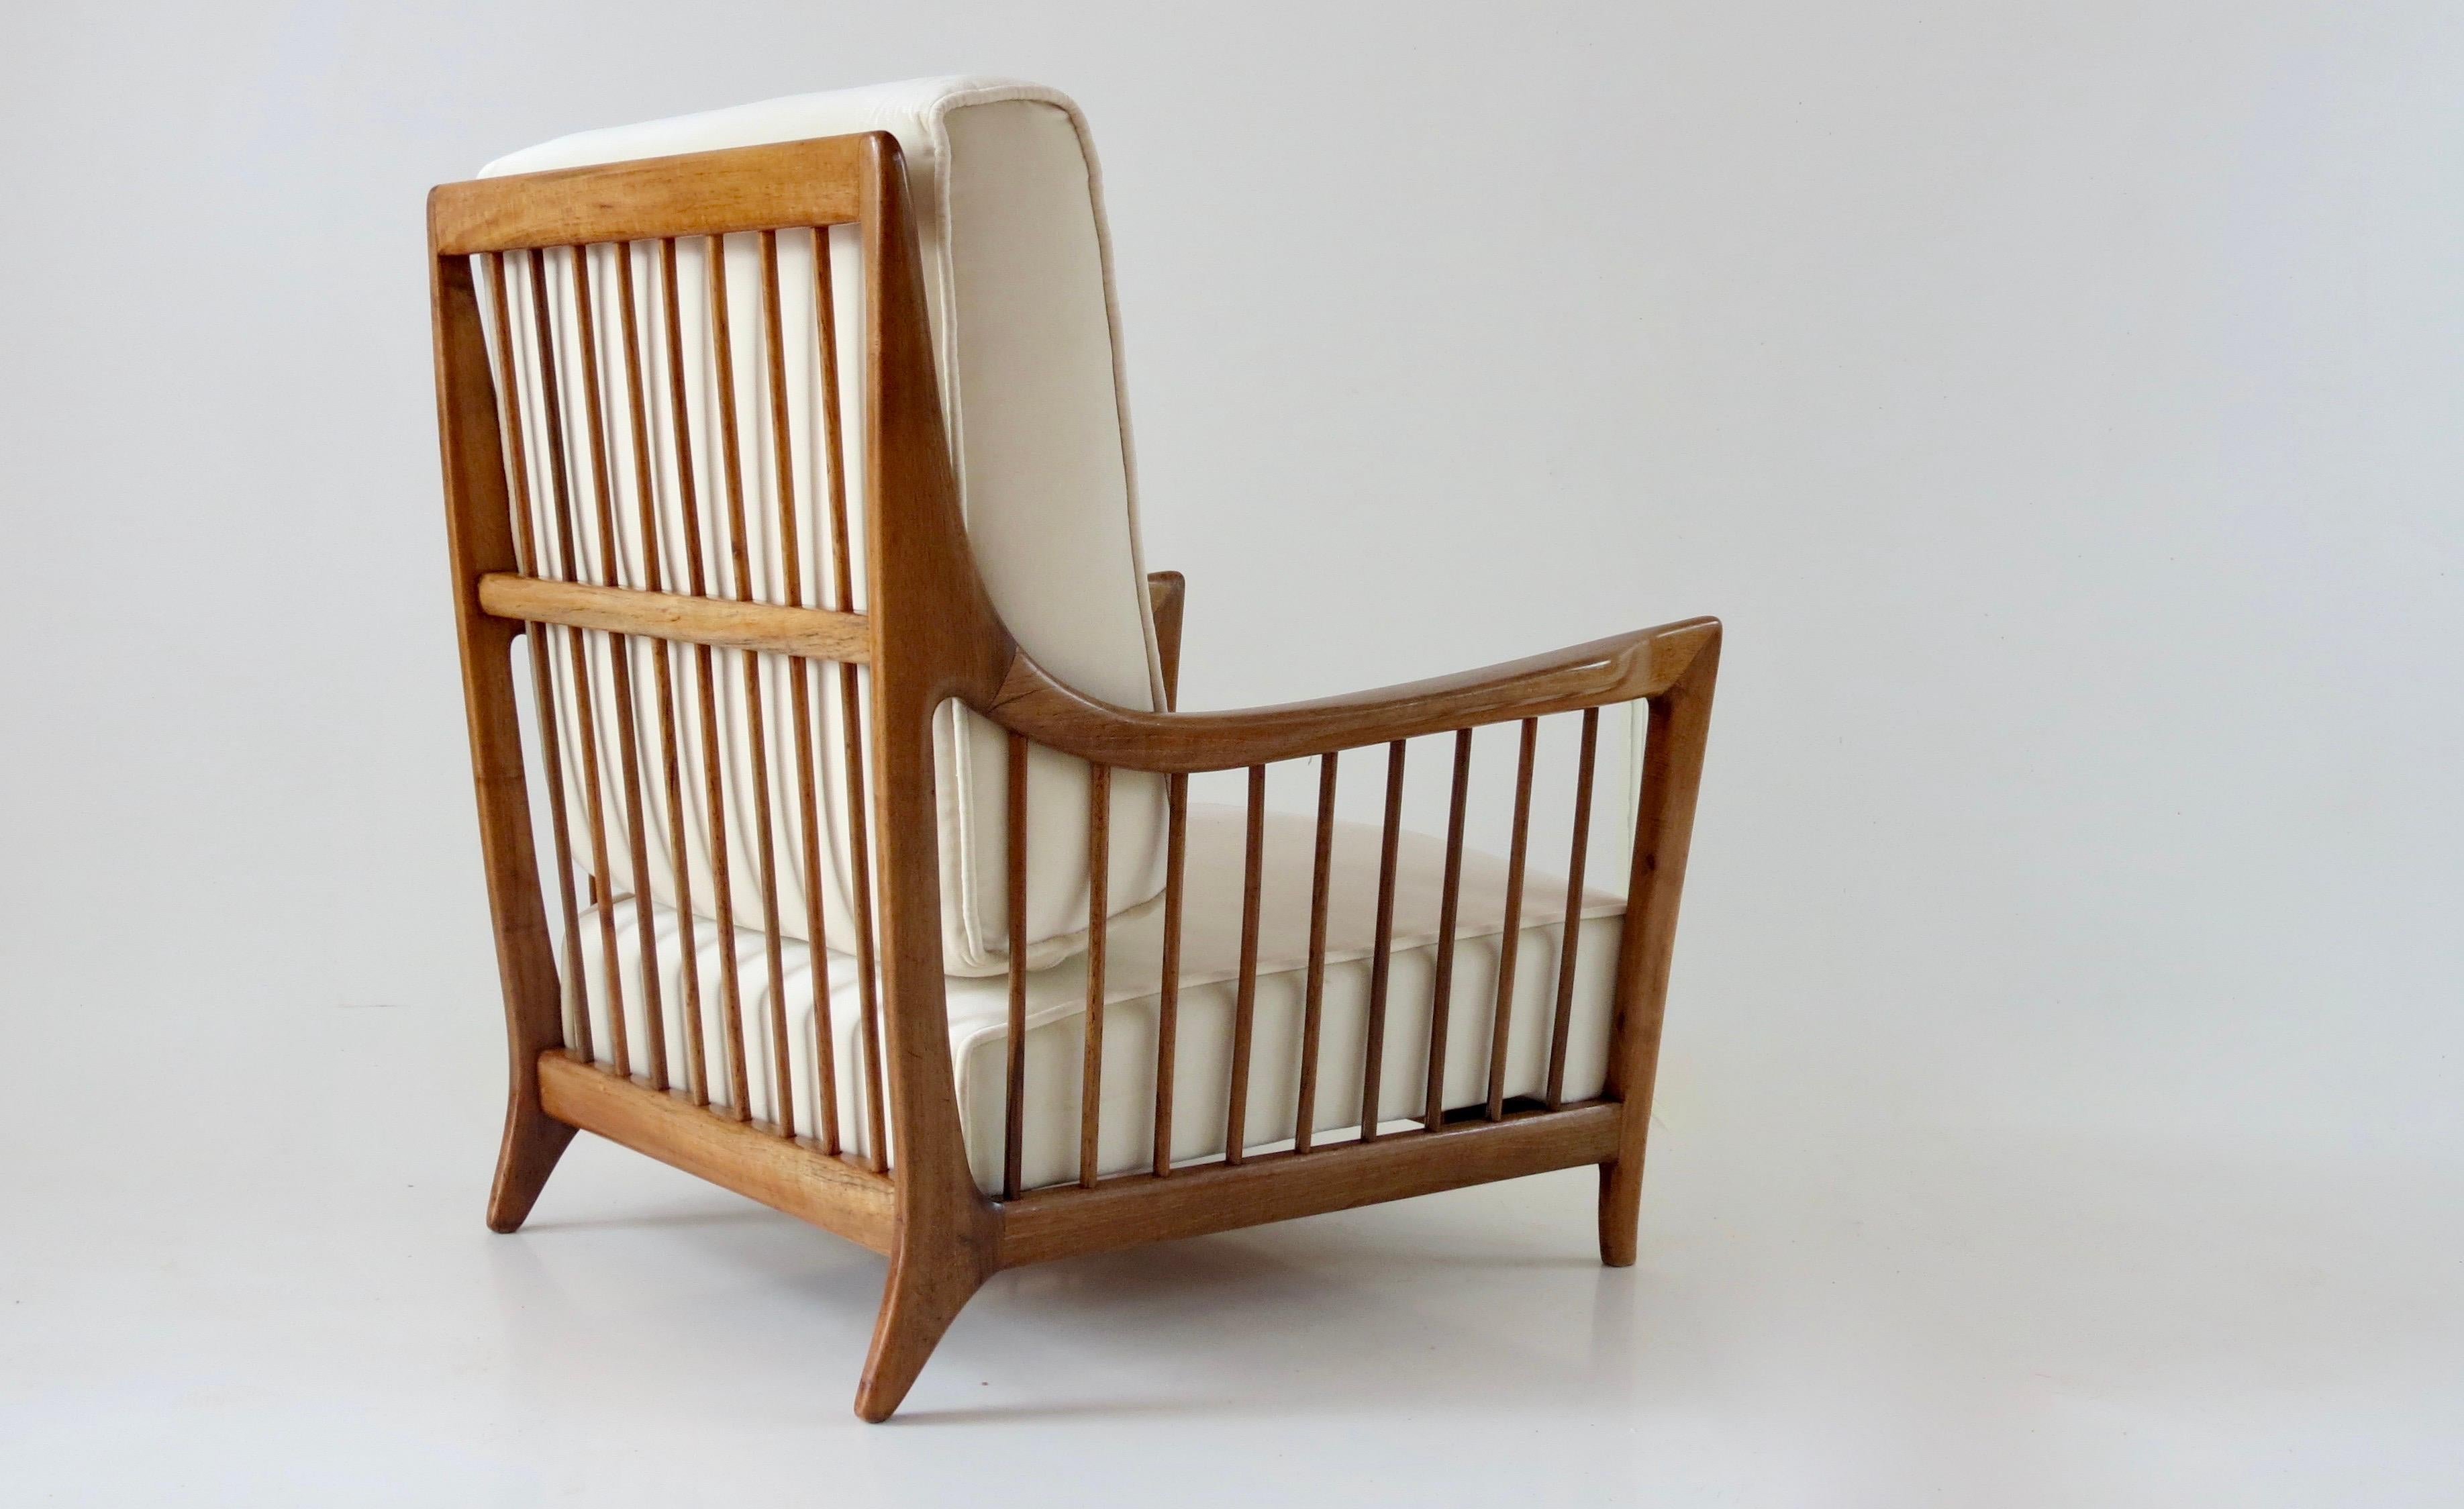 Elegant rare armchair, model n. 118/F, designed by Arch. Paolo Buffa and produced by Eredi Marellli Cantù, 1950
cherrywood and fabric reupholstery in white velvet cotton
Measures: 79 x 73 cm, height 87 cm, arms height 53 cm seat height 33 cm
very